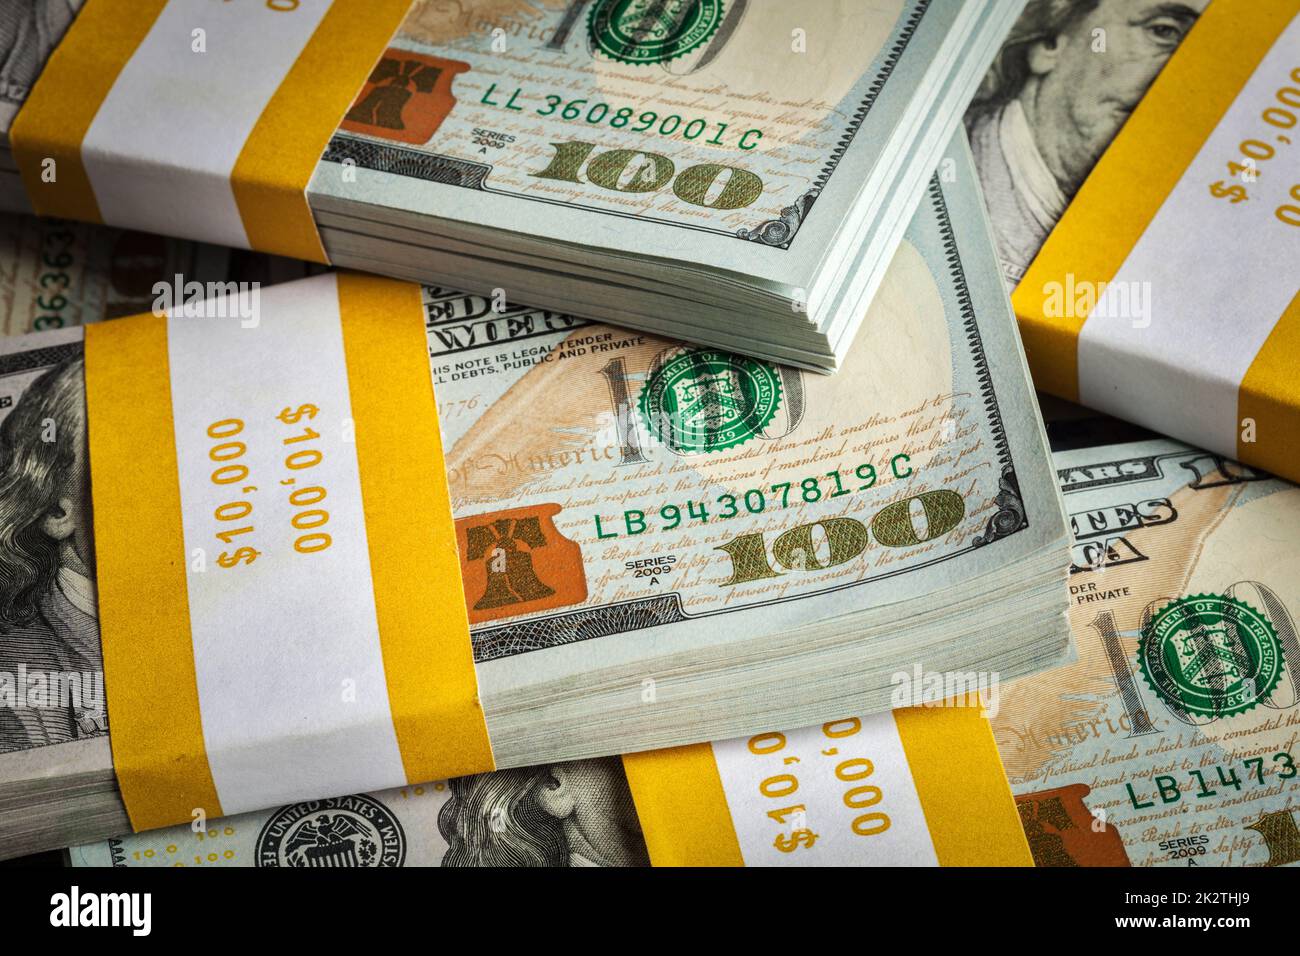 Background of new 100 US dollars 2013 banknotes Stock Photo